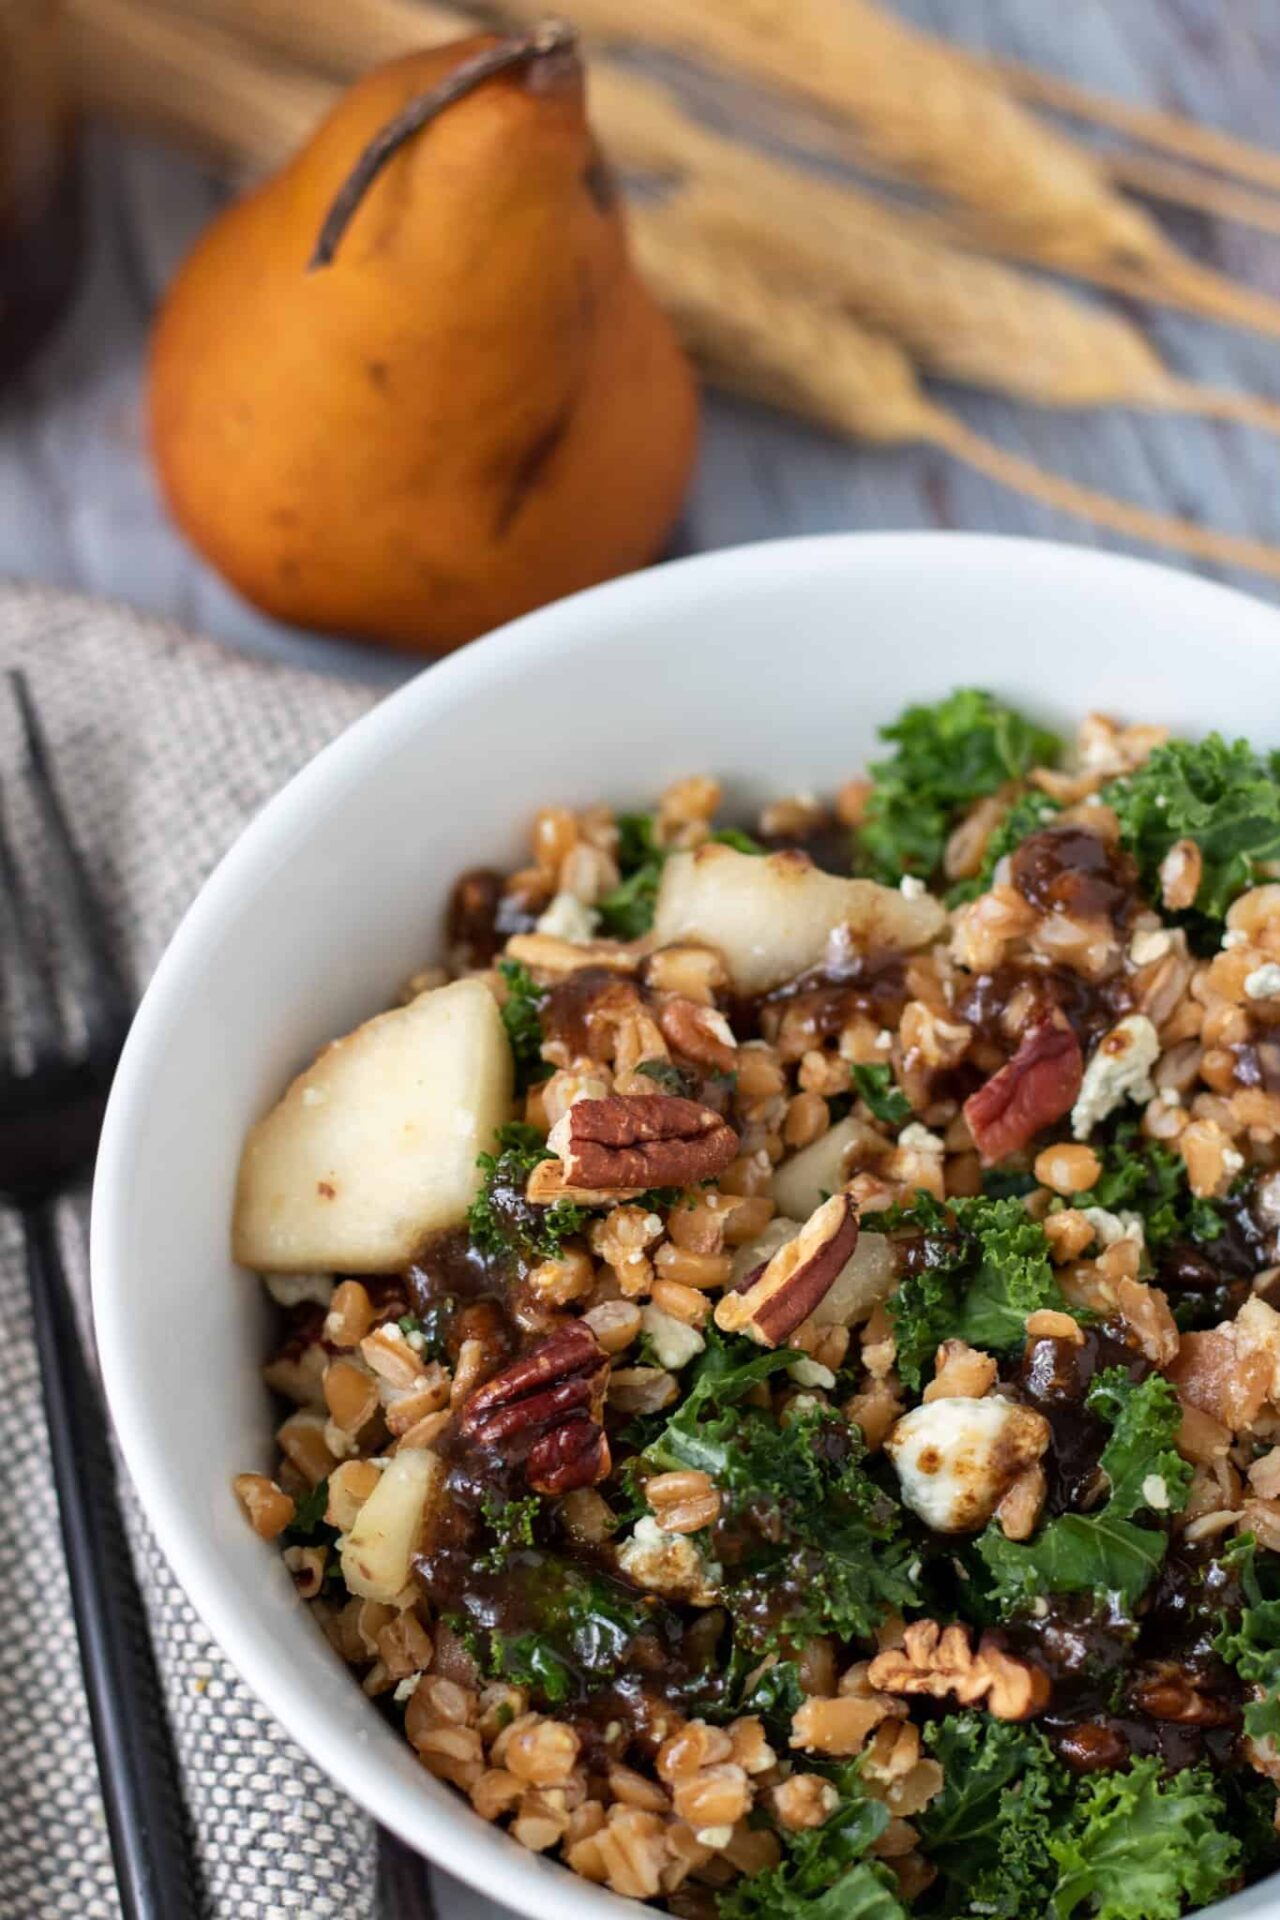 a white salad bowl with farro, kale, pecans, bacon, Gorgonzola crumbles and chunks of pears. There's a black fork next to the bowl. A whole pear is in the background with dried wheat stalks